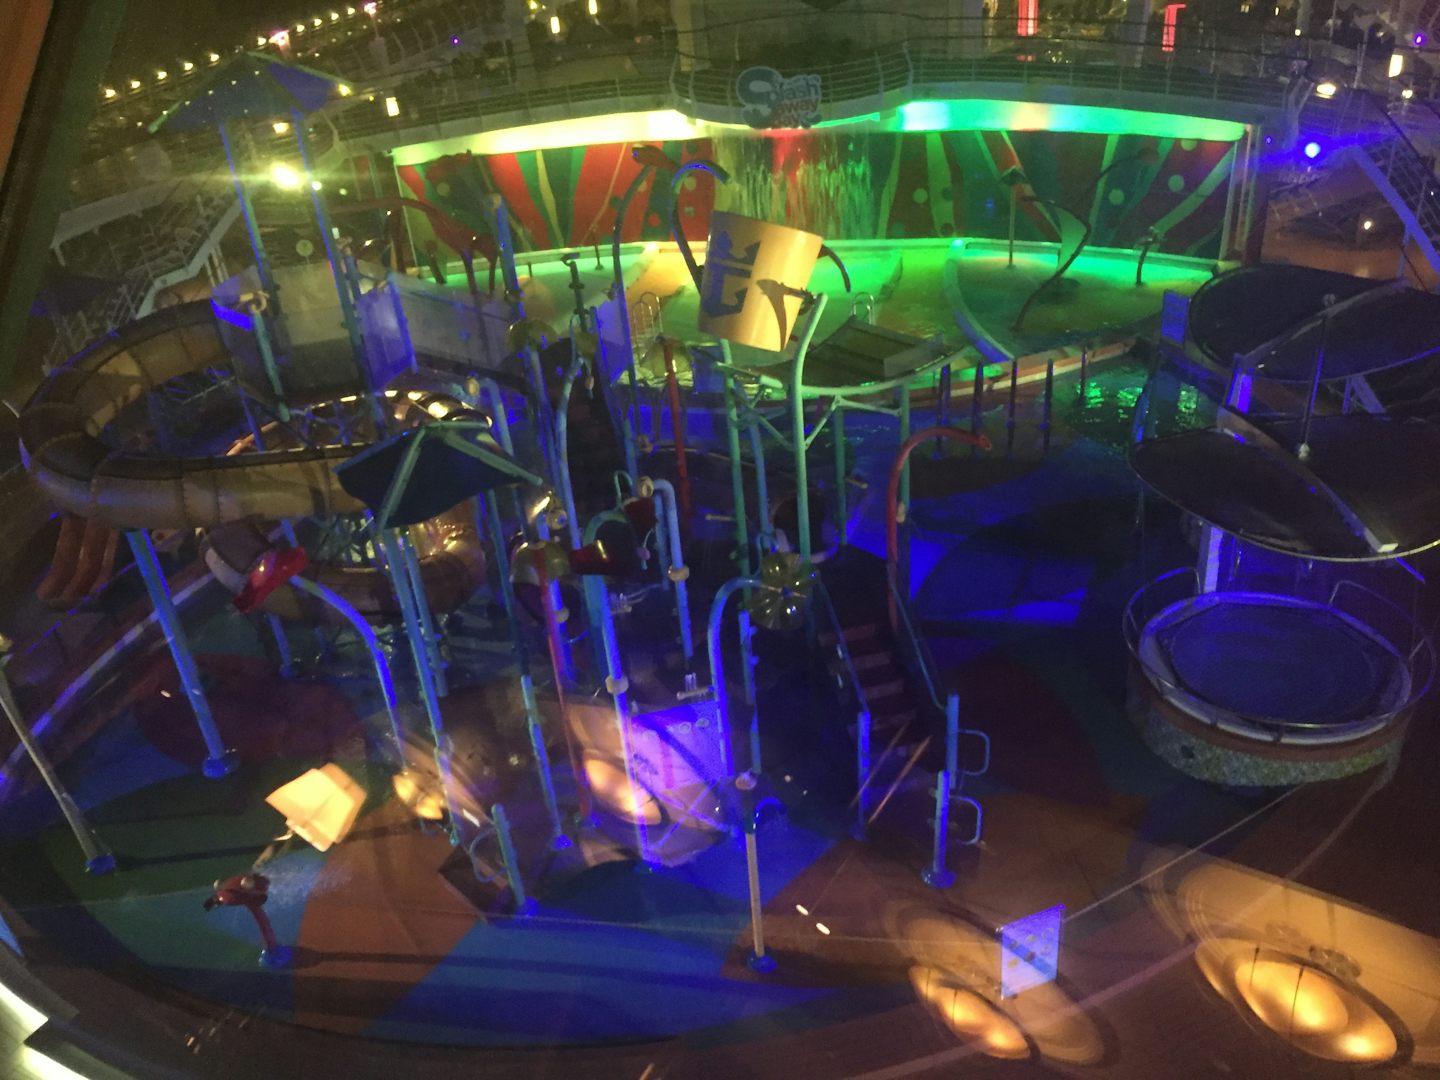 This is a view of the kids splash park area at night.